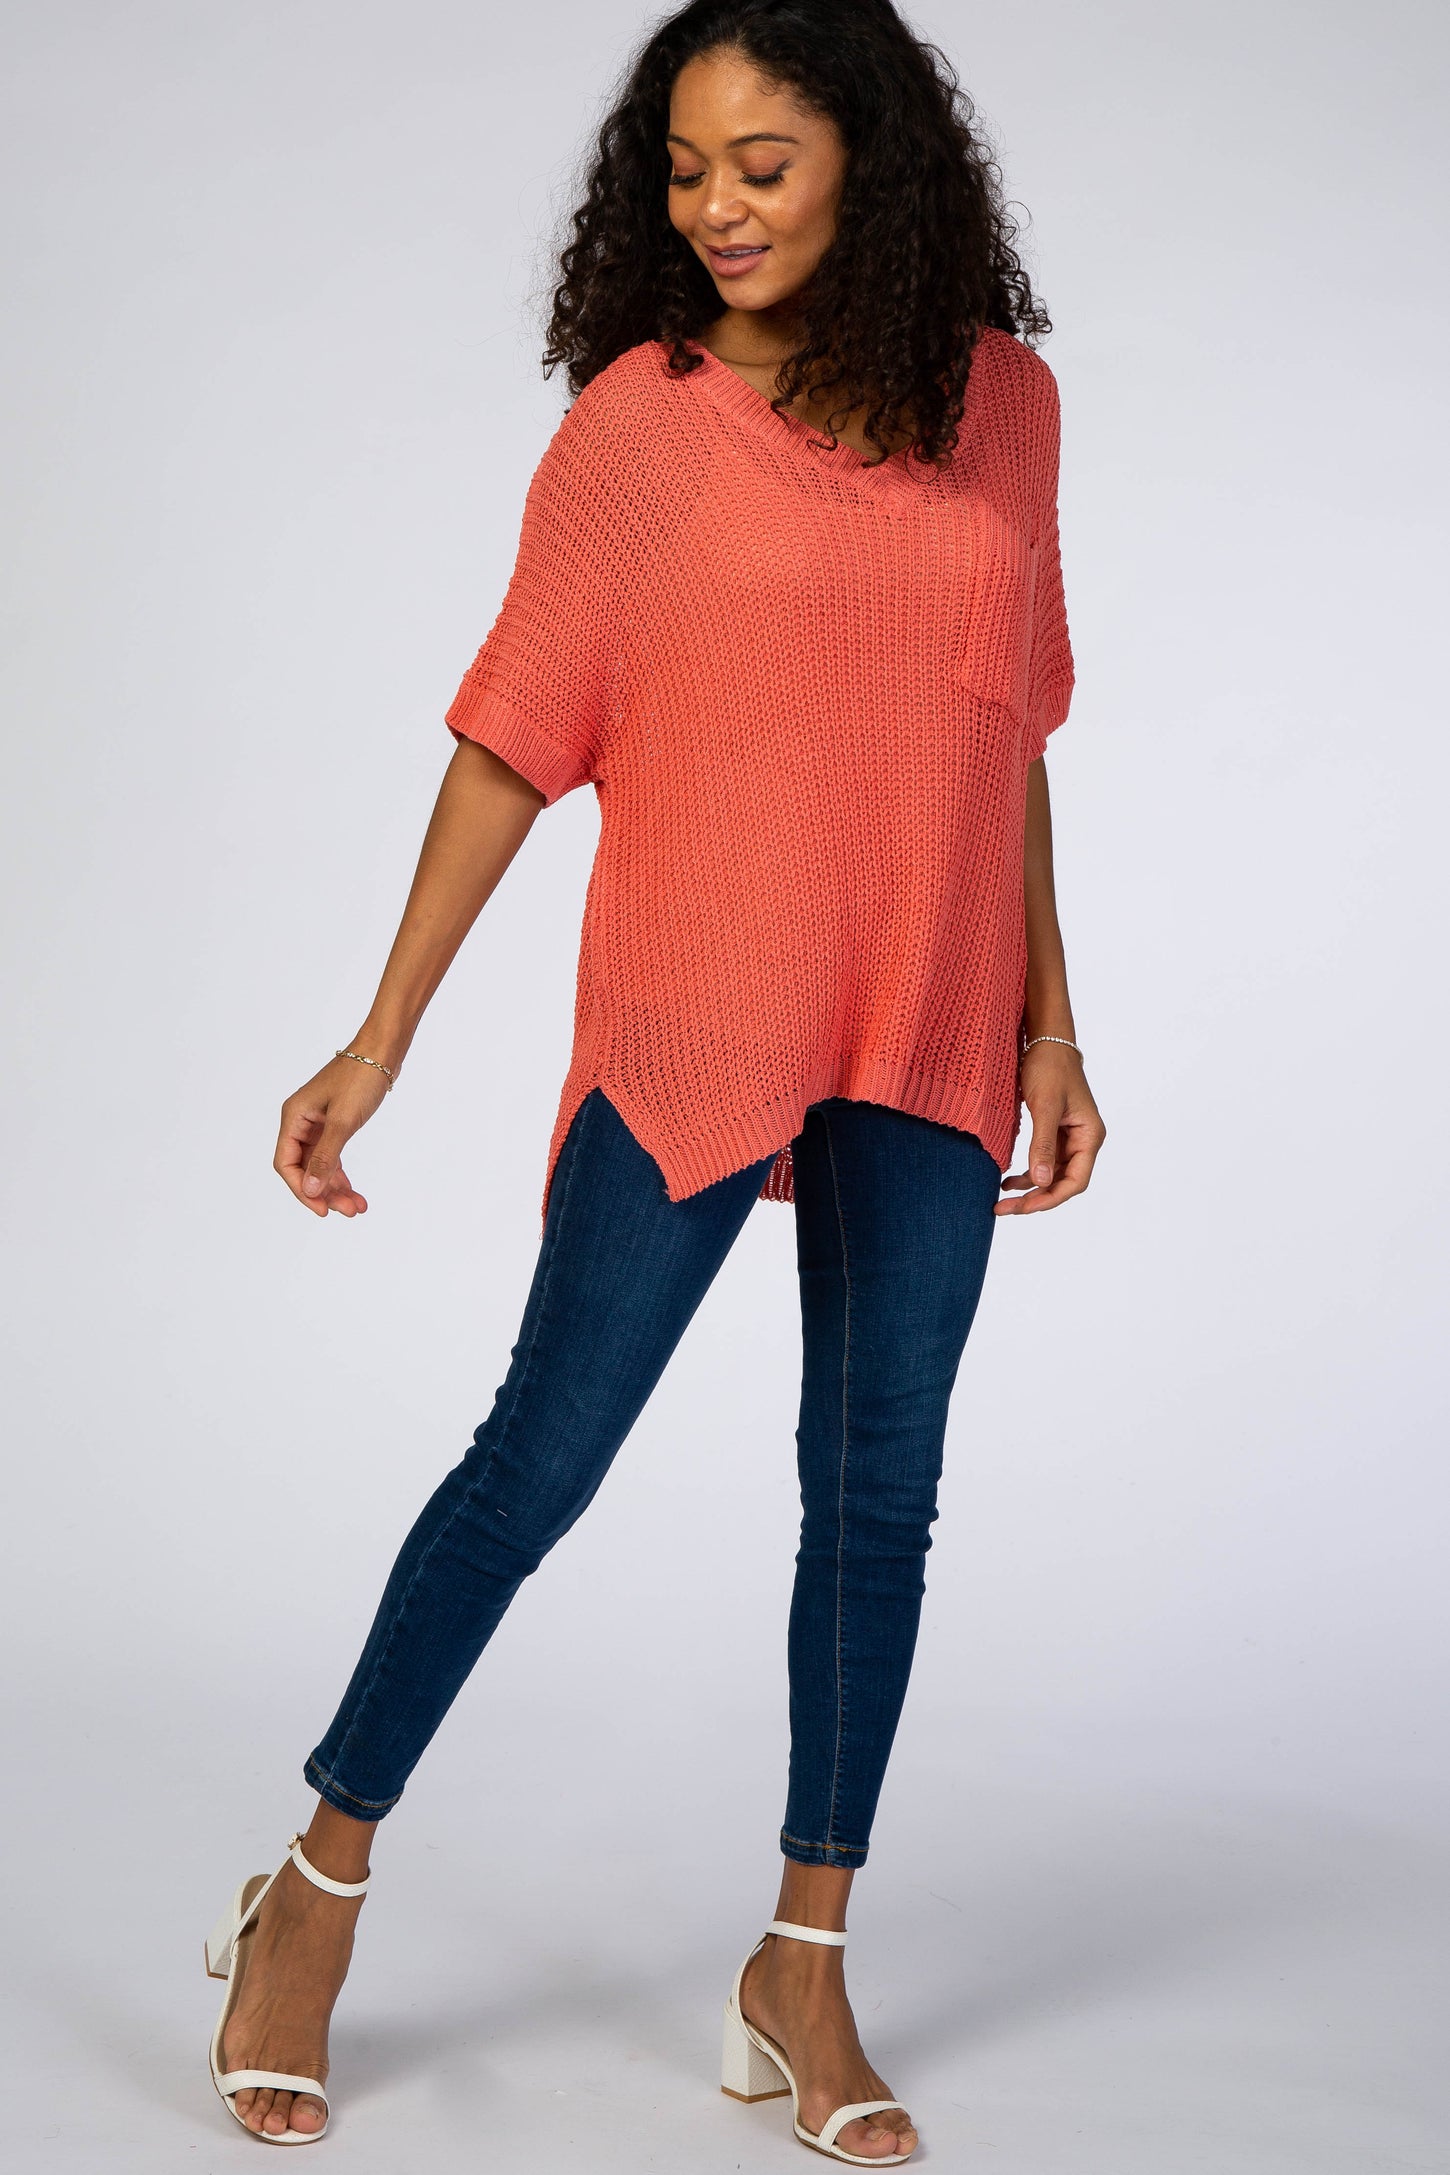 Coral Pocket Front Knit Top